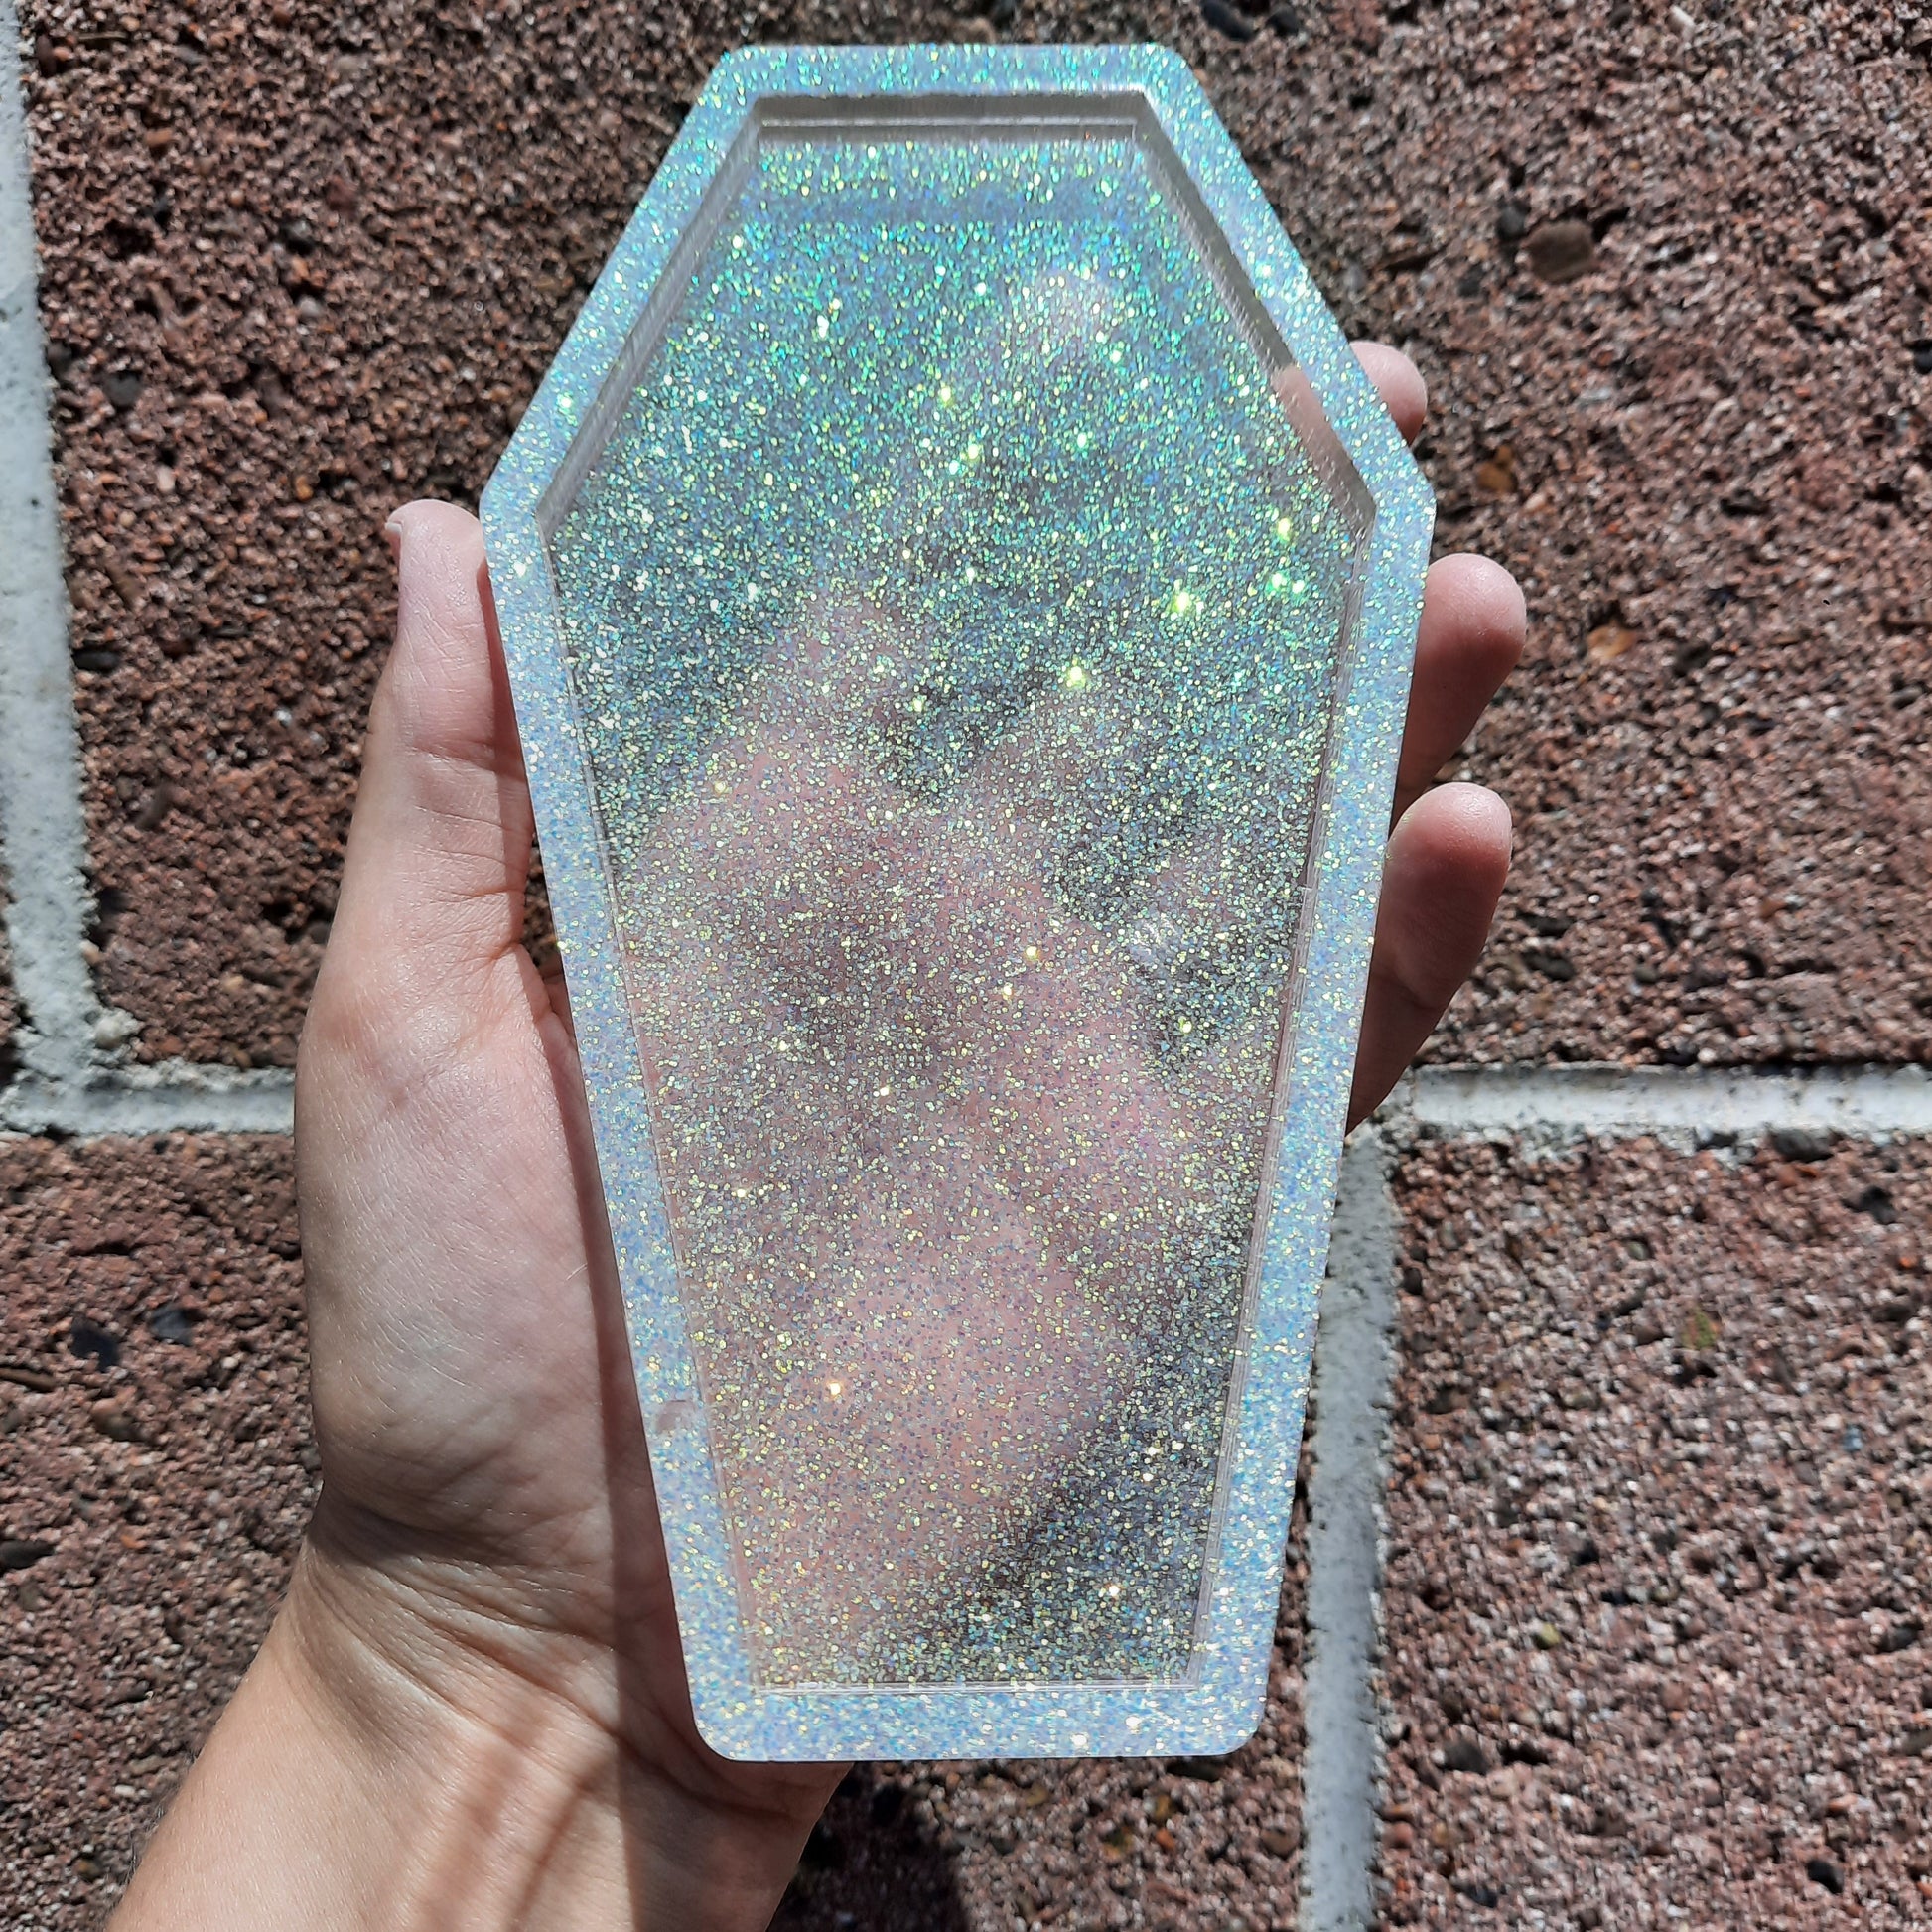 Coffin Tray - EcoPoxy Resin Glitter for candles or soap